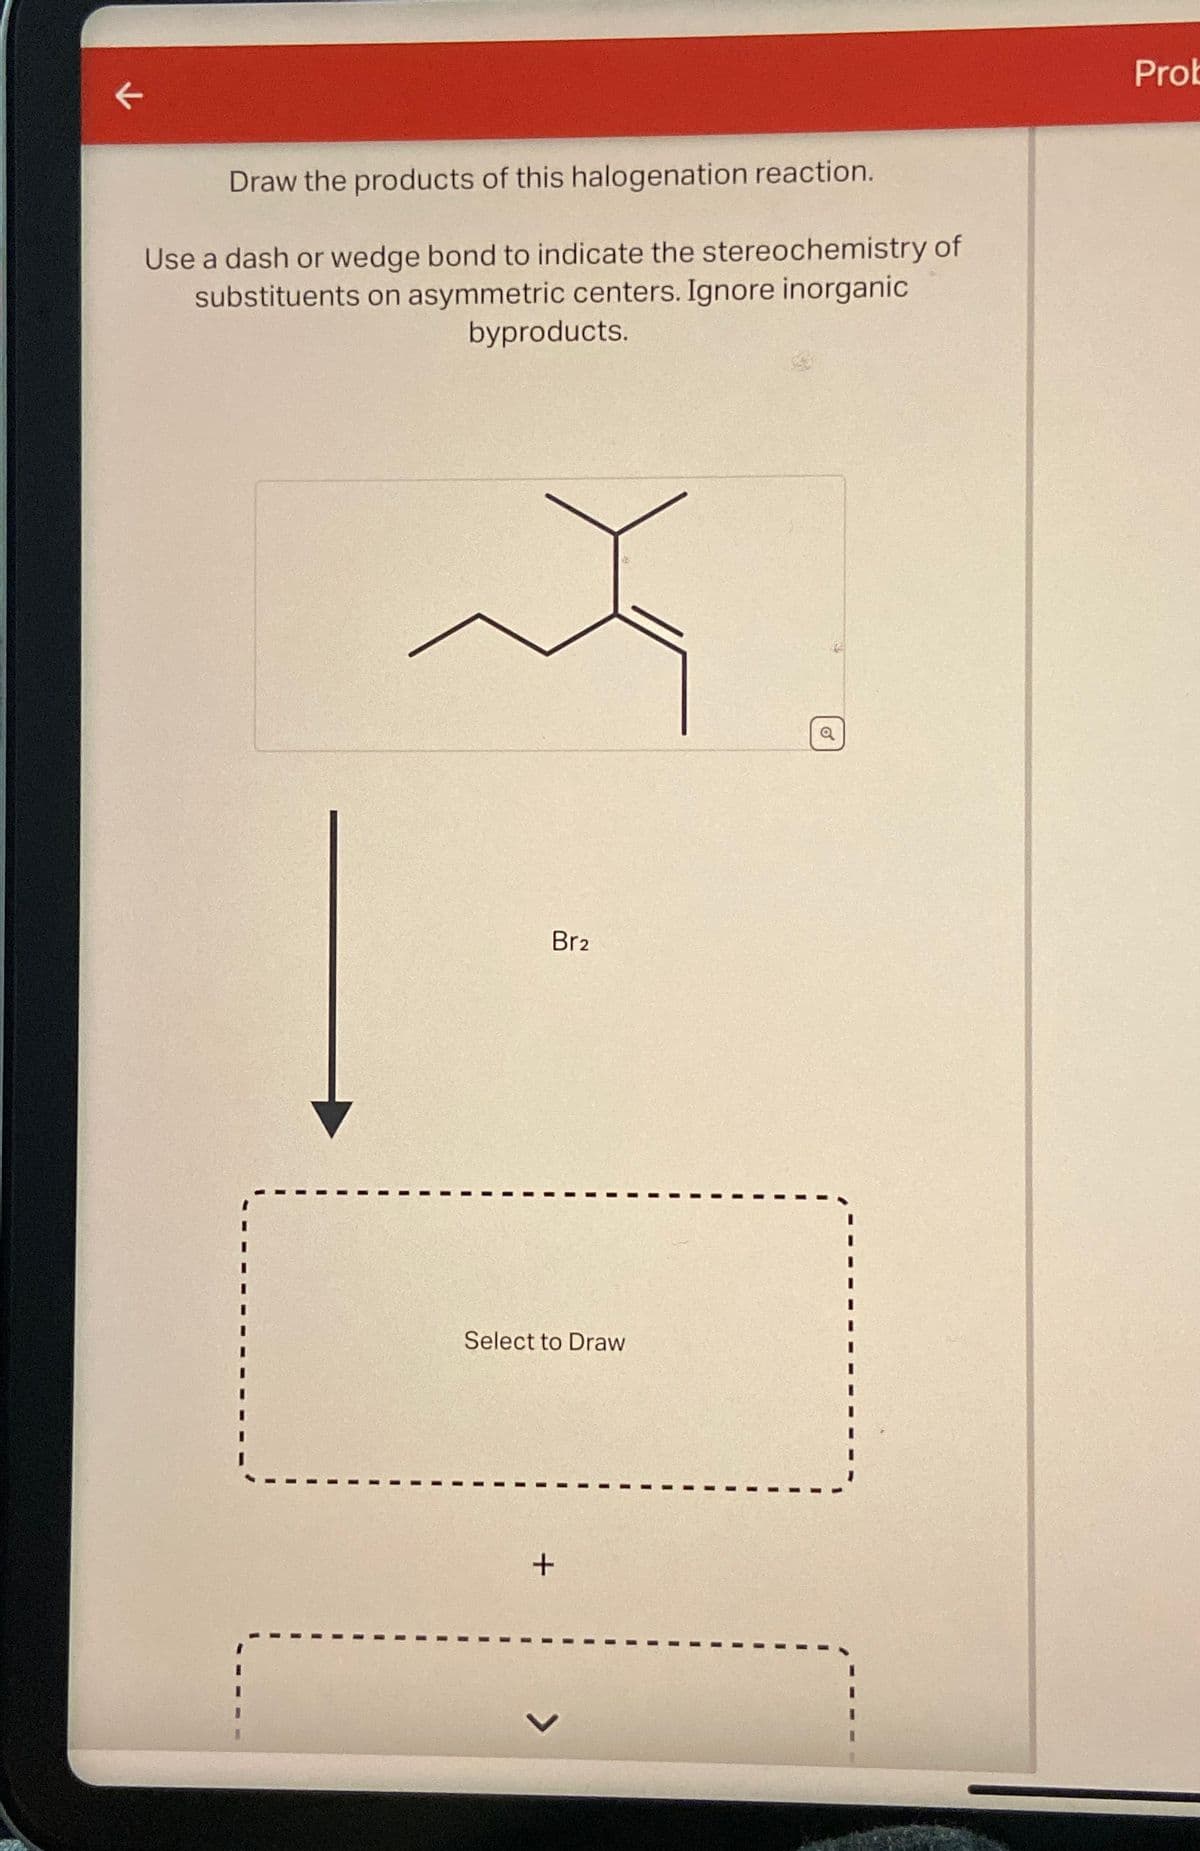 K
Draw the products of this halogenation reaction.
Use a dash or wedge bond to indicate the stereochemistry of
substituents on asymmetric centers. Ignore inorganic
byproducts.
Br2
Select to Draw
+
Prot